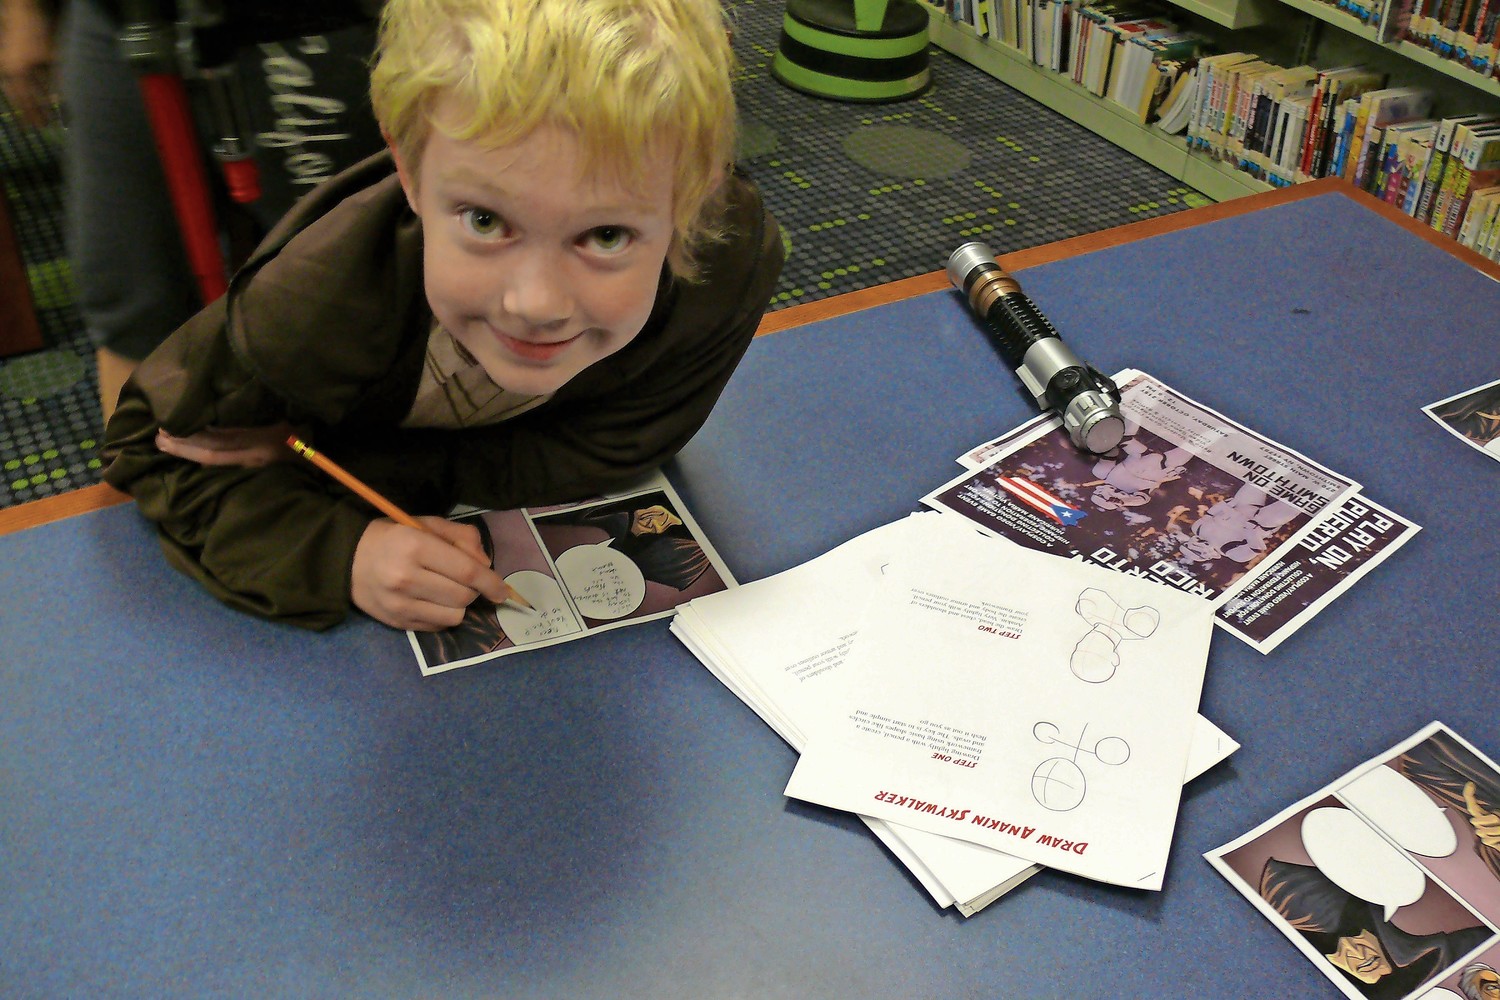 Elliot Fox, of East Meadow, created a Star Wars storyboard during an afternoon workshop in the Young Adults department at the library.